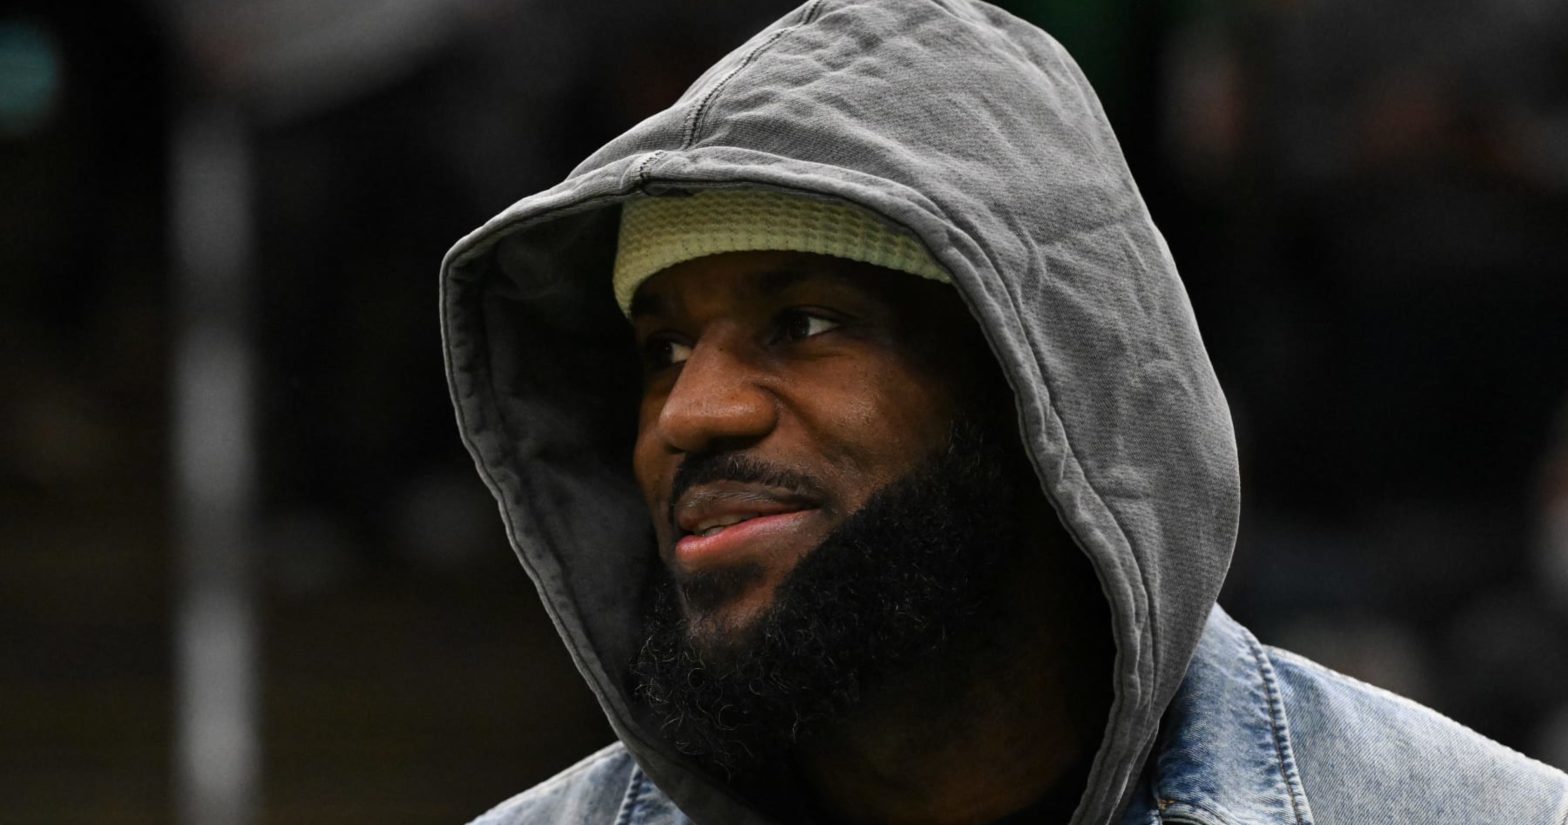 Lakers’ LeBron James Says He’s Considered Playing for Knicks: ‘I’ve Had That Thought’